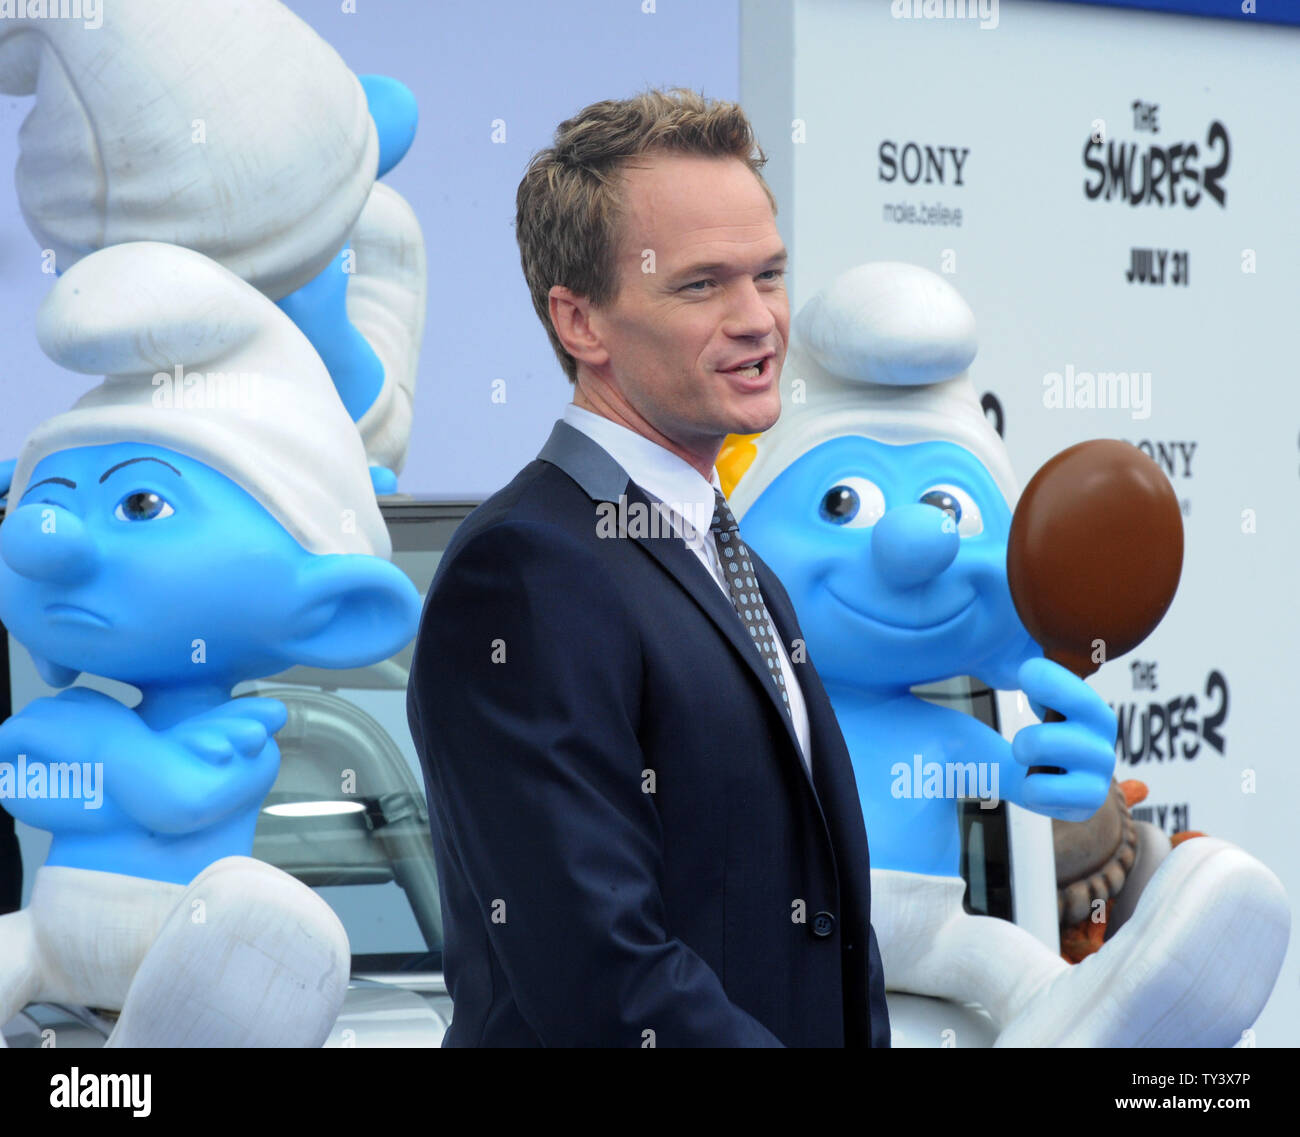 Actor Neil Patrick Harris, the voice of Patrick in the motion picture animated comedy 'The Smurfs 2', attends the premiere of the film at the Regency Village Theatre, in the Westwood section of Los Angeles on July 28, 2013. The Smurfs join forces with their human friends to rescue Smurfette, who has been kidnapped by Gargamel since she knows a secret spell that can turn the evil sorcerer's newest creation - creatures called the Naughties - into real Smurfs.  UPI/Jim Ruymen Stock Photo